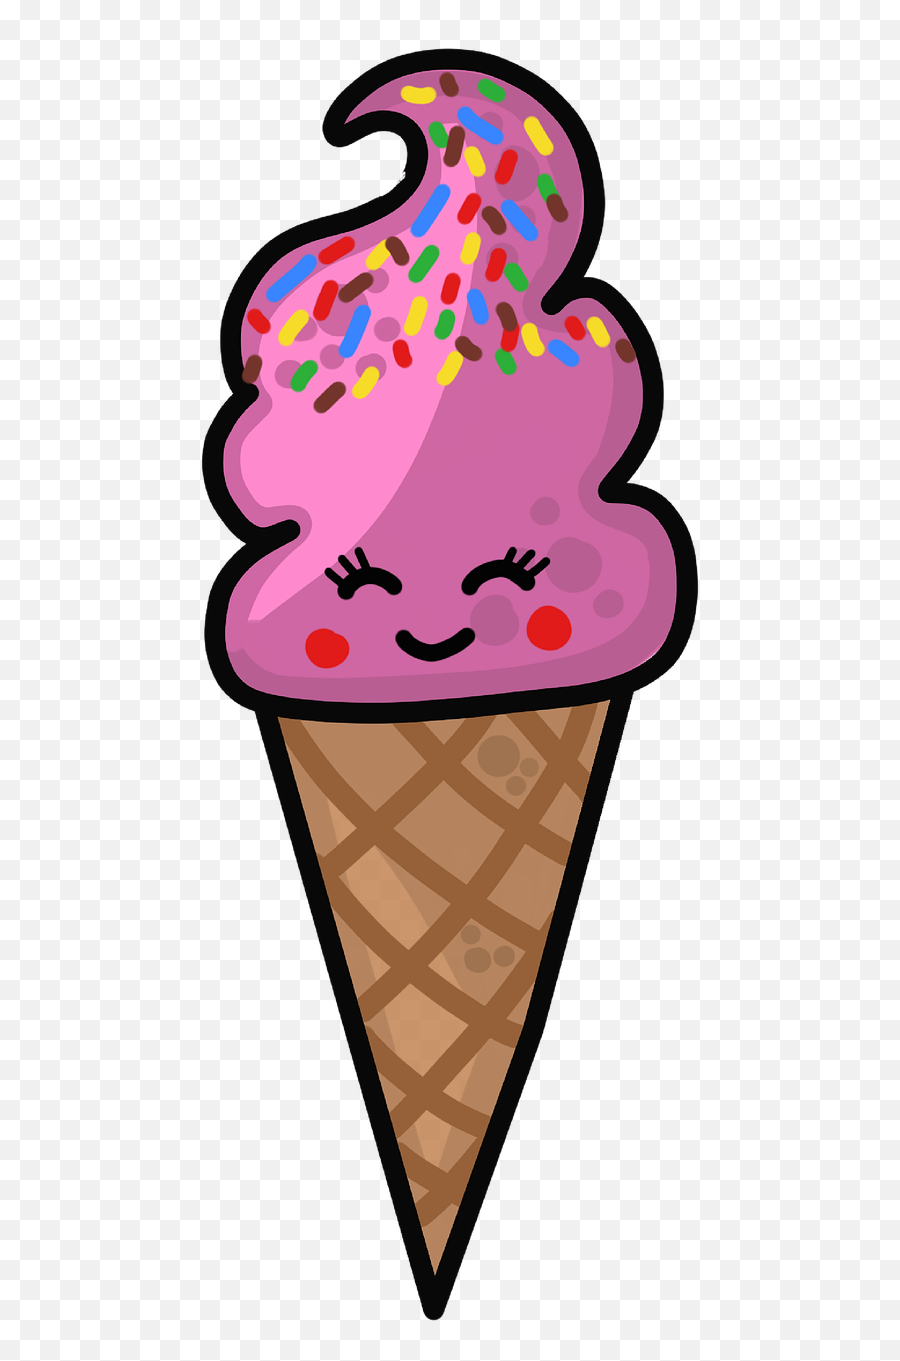 Ice Cream Desert Sweets - Free Image On Pixabay Cone Png,Icecream Png